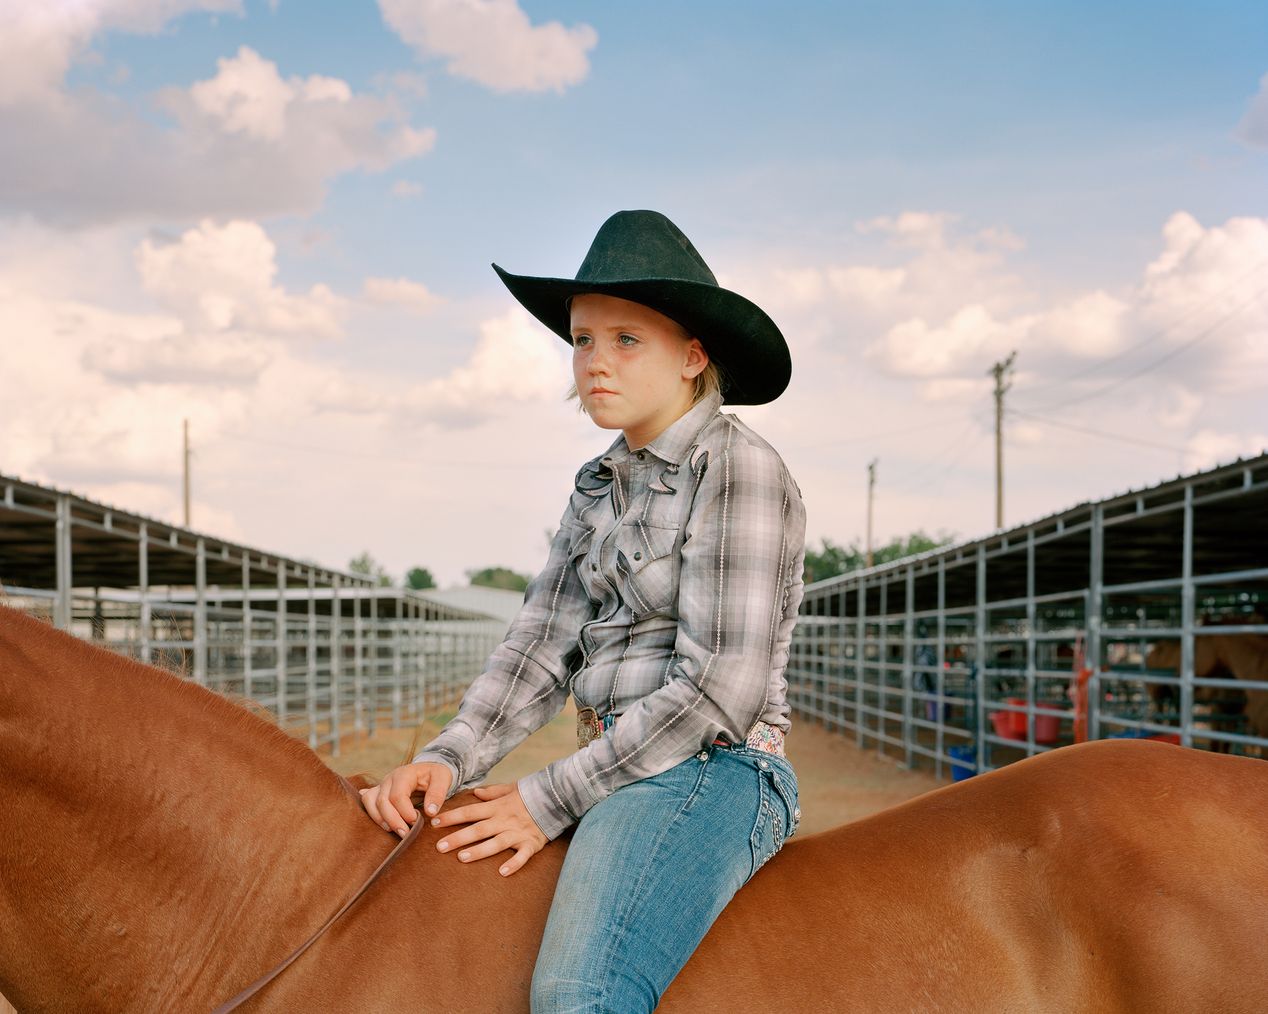 Teenage cowgirl wearing a black hat on a brown horse, environmental portrait photography, Ilona Szwarc, contemporary Los Angeles artist.